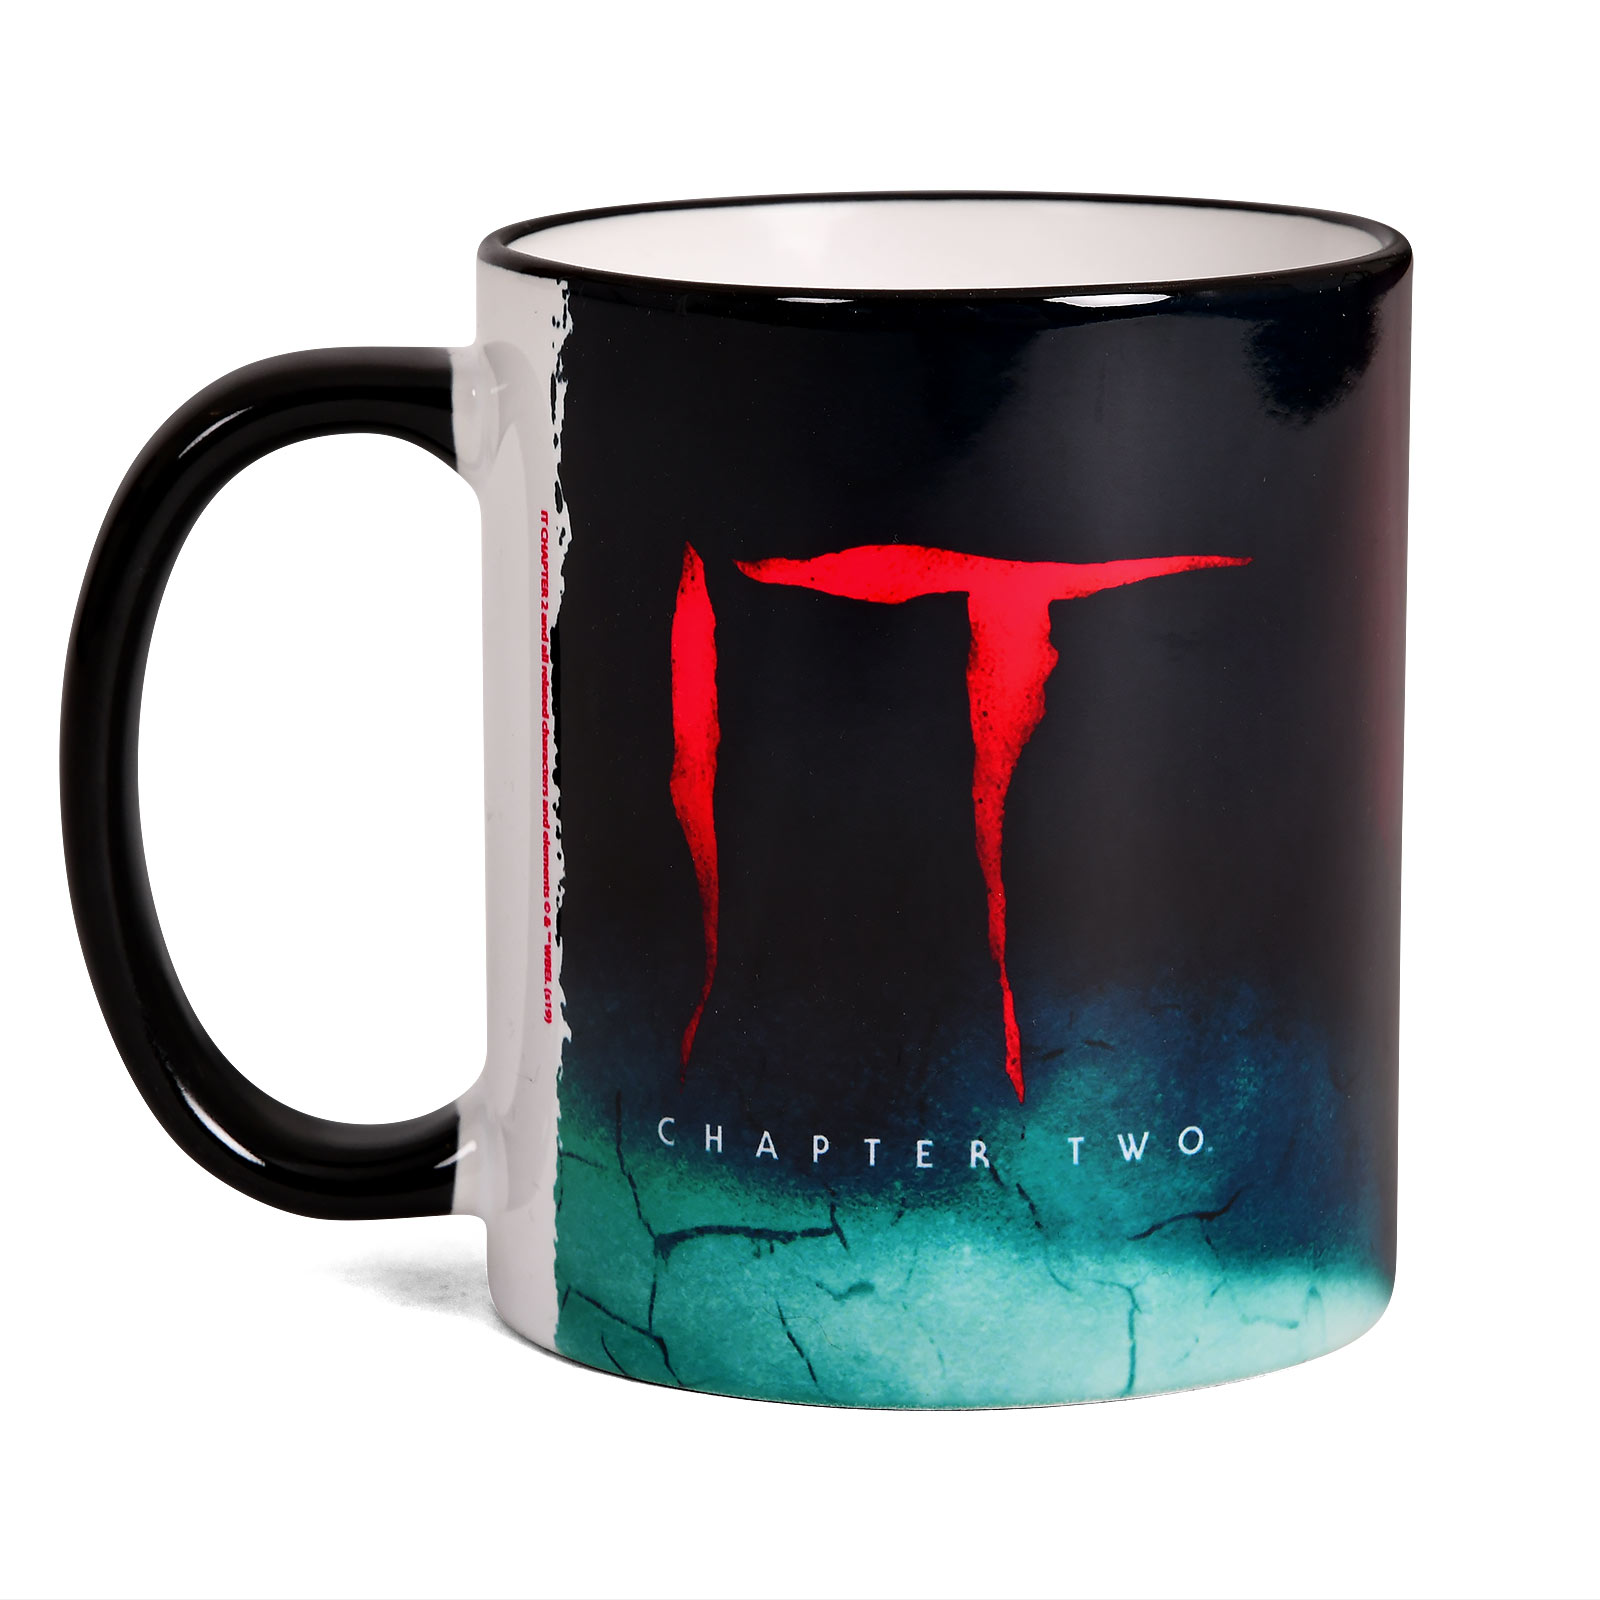 Stephen King's IT - Pennywise Chapter Two Mug